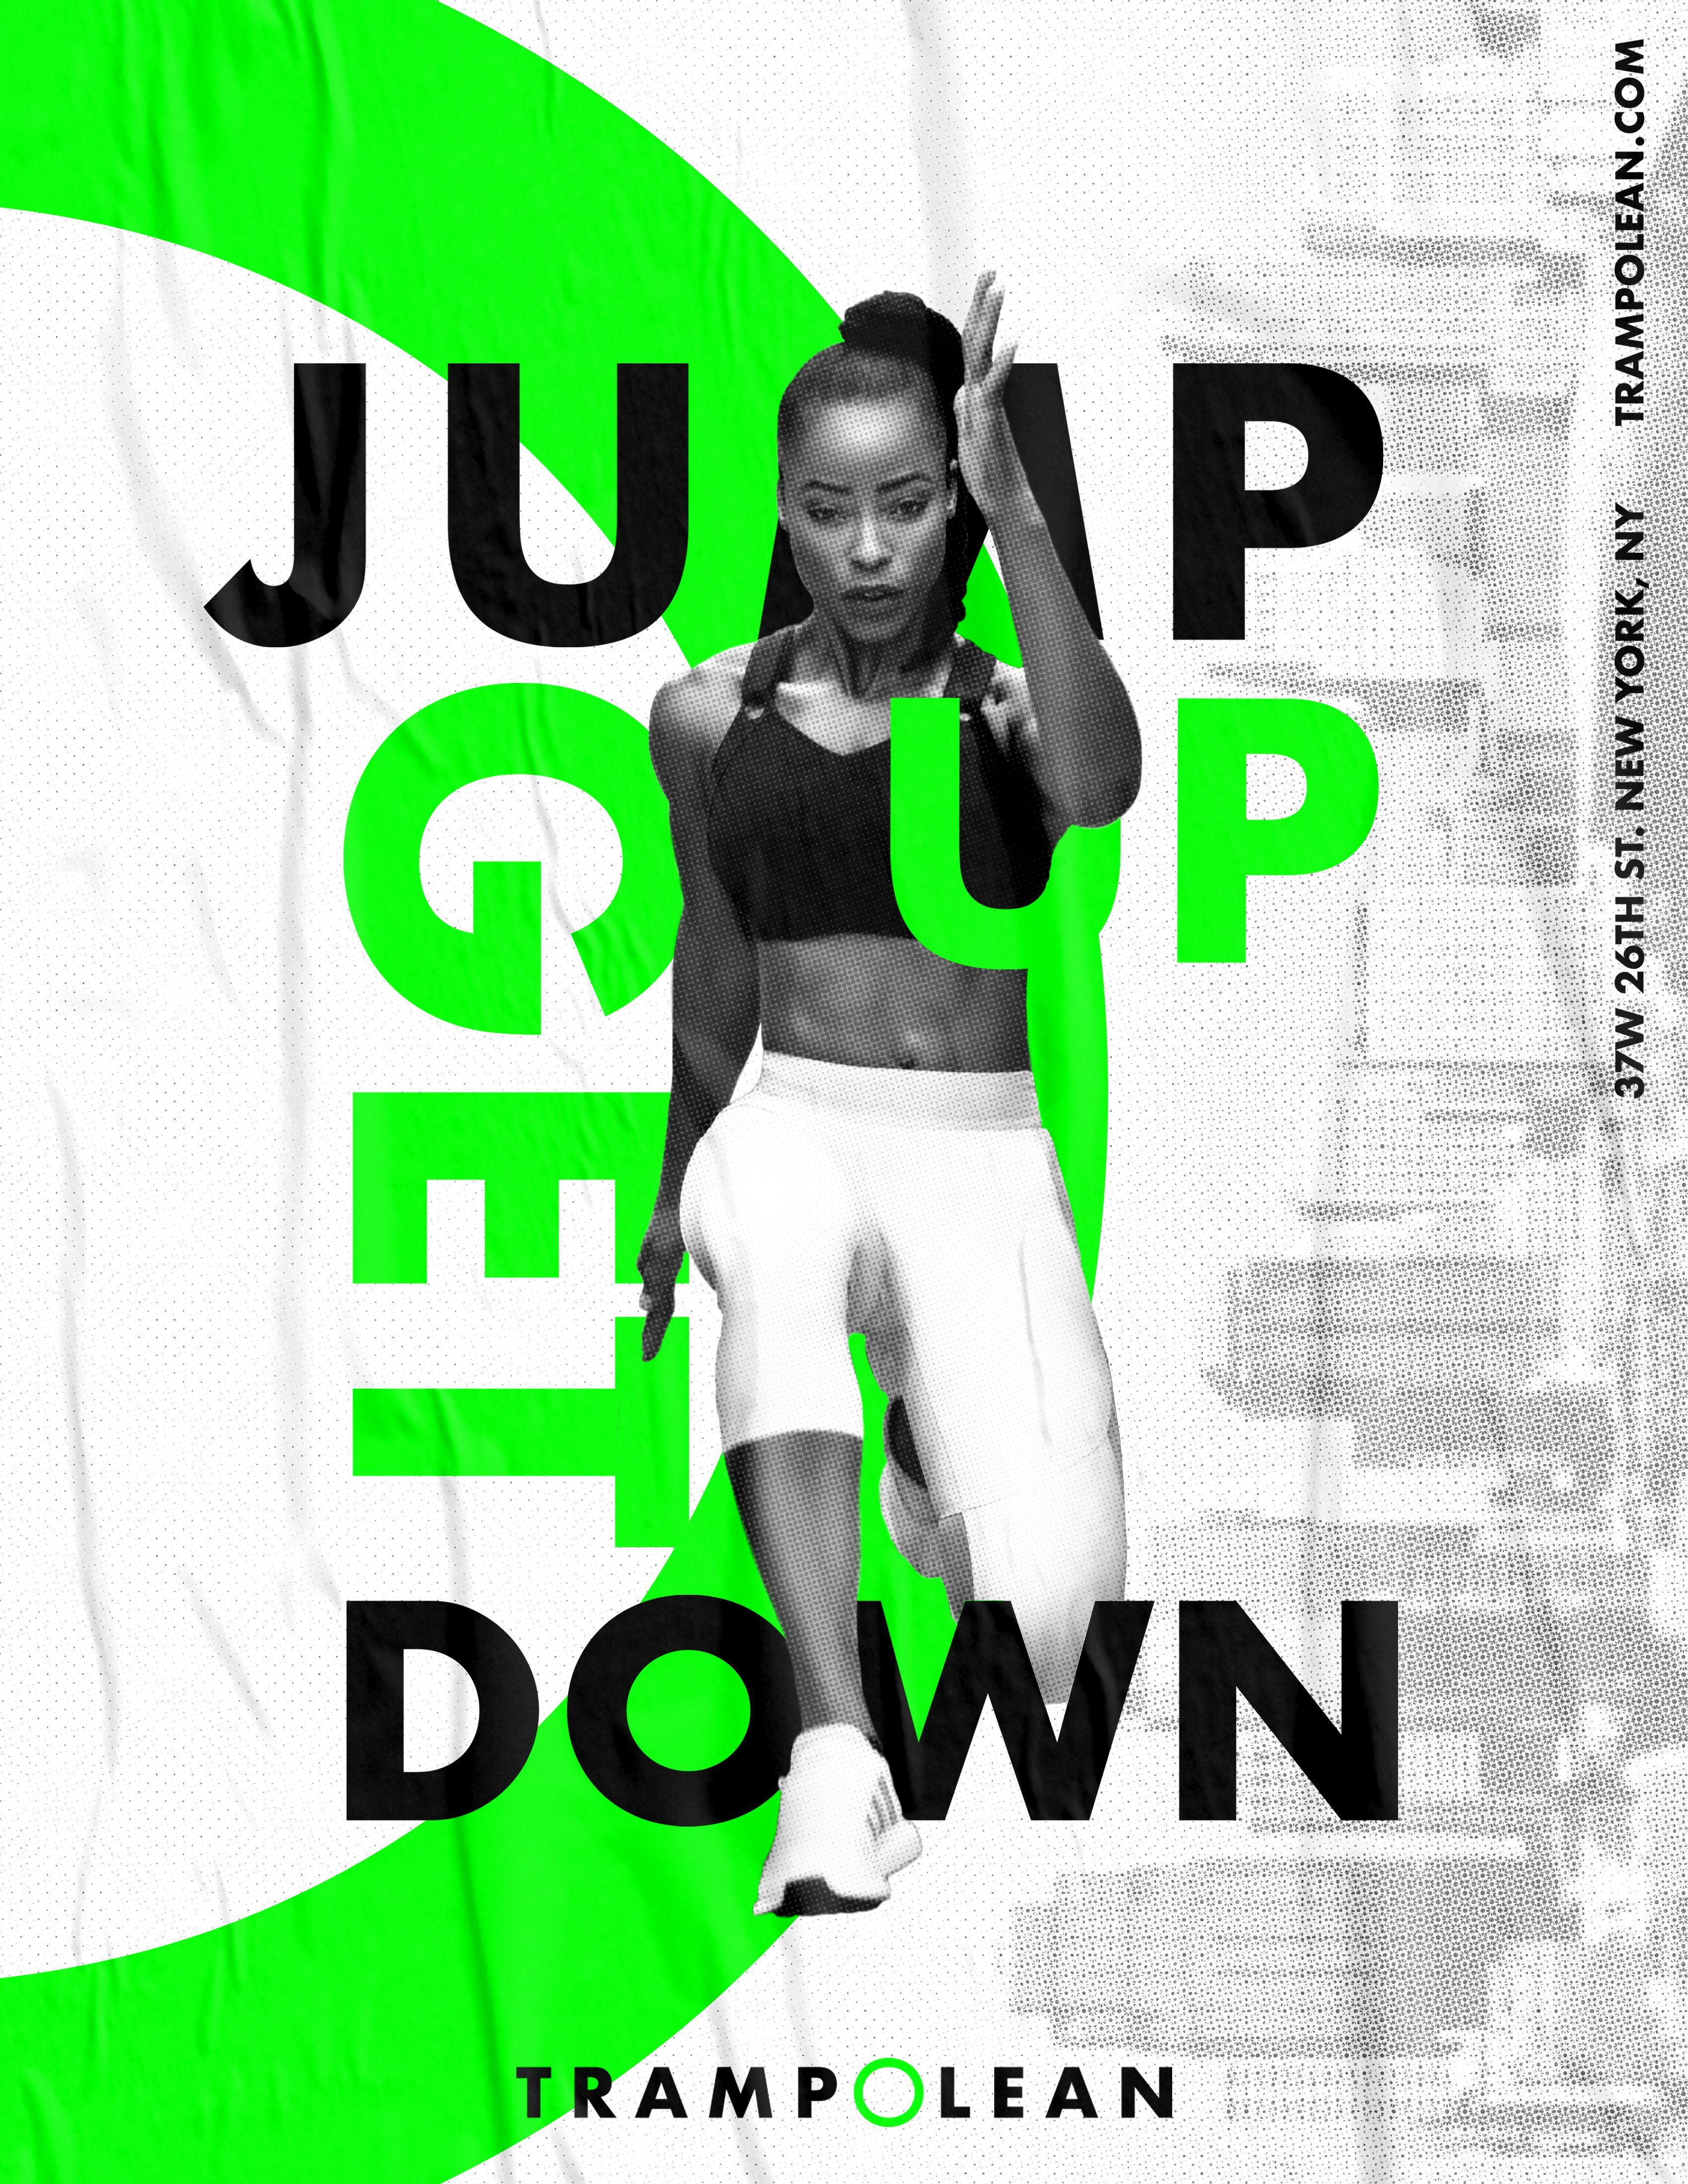 FITNESS/GYM POSTER -   17 fitness Design flyer ideas